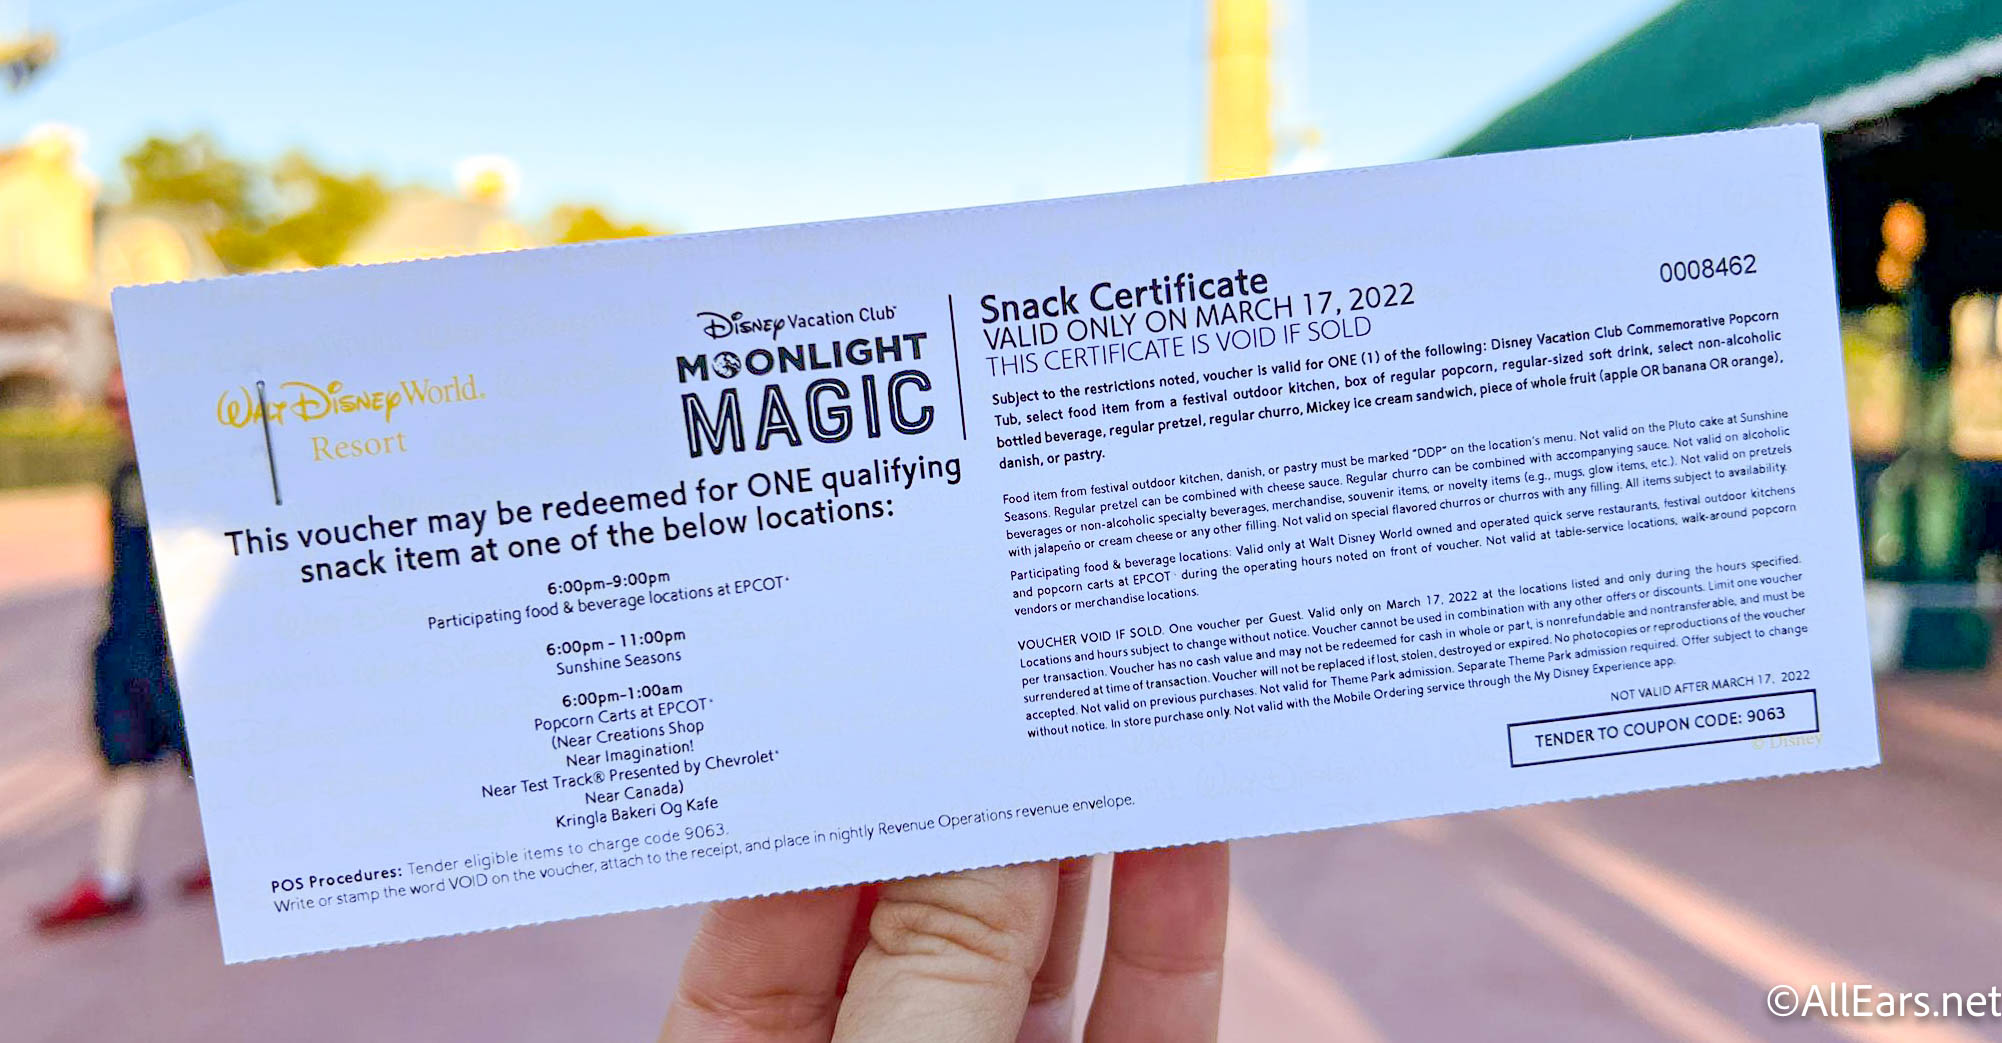 Registration Opens TODAY for Moonlight Magic Event in Disney World